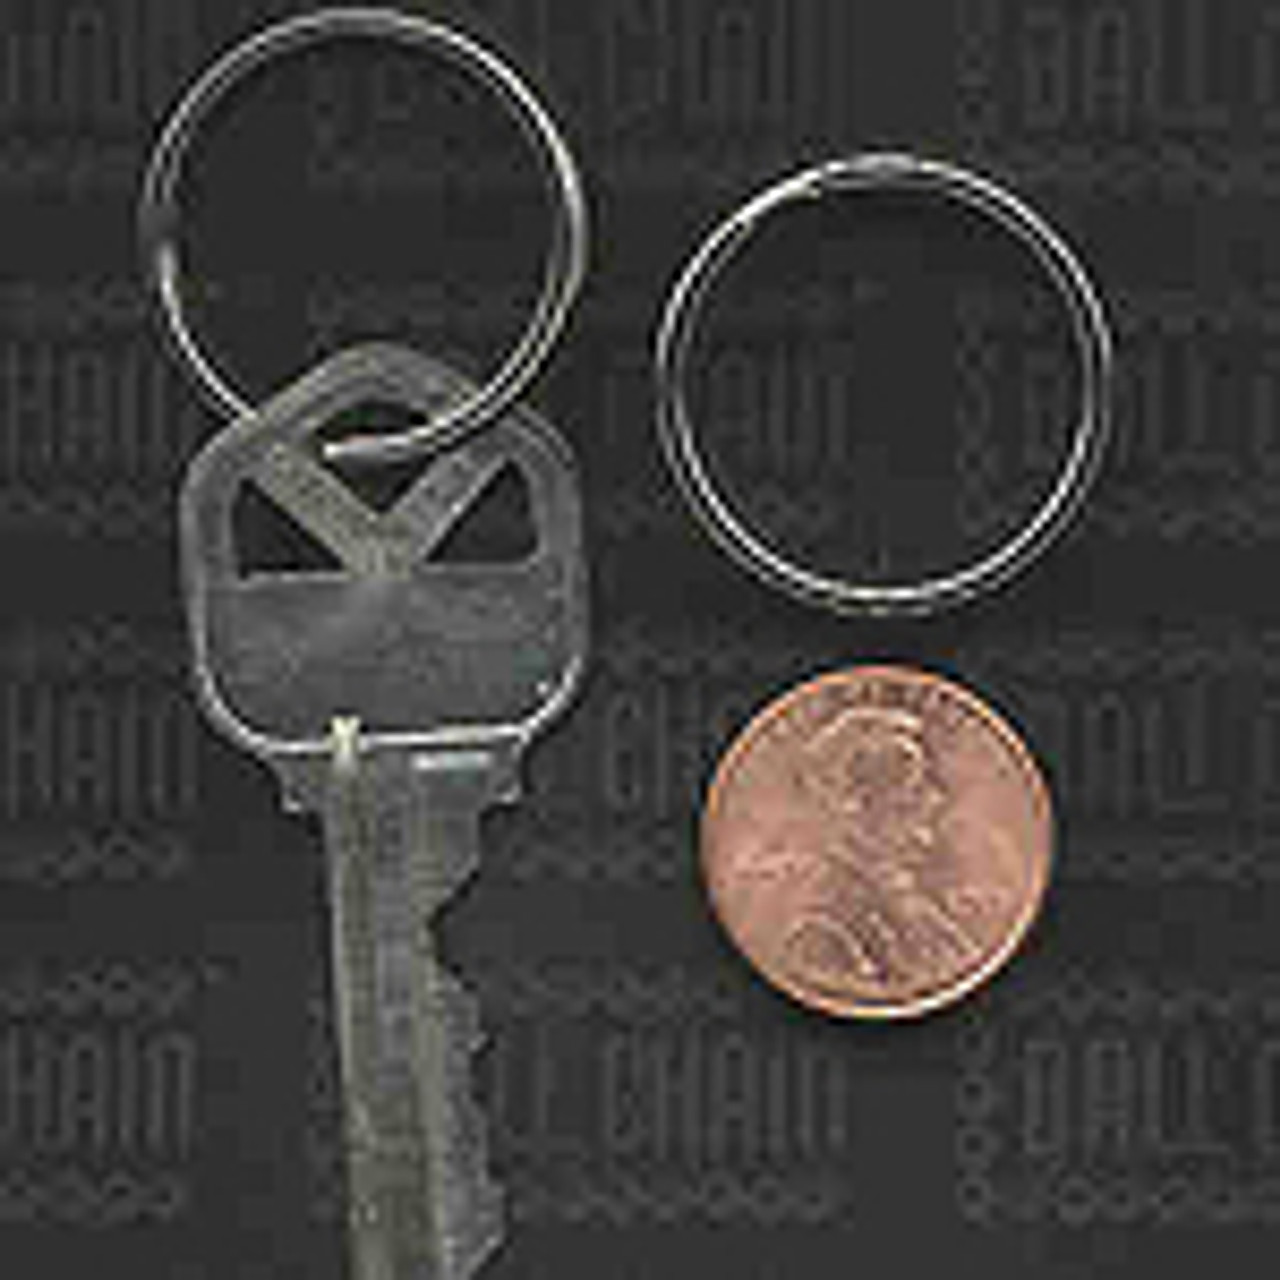 25mm nickel plated split ring perspective photo comparing the size of the key ring to a key and a united states penny.